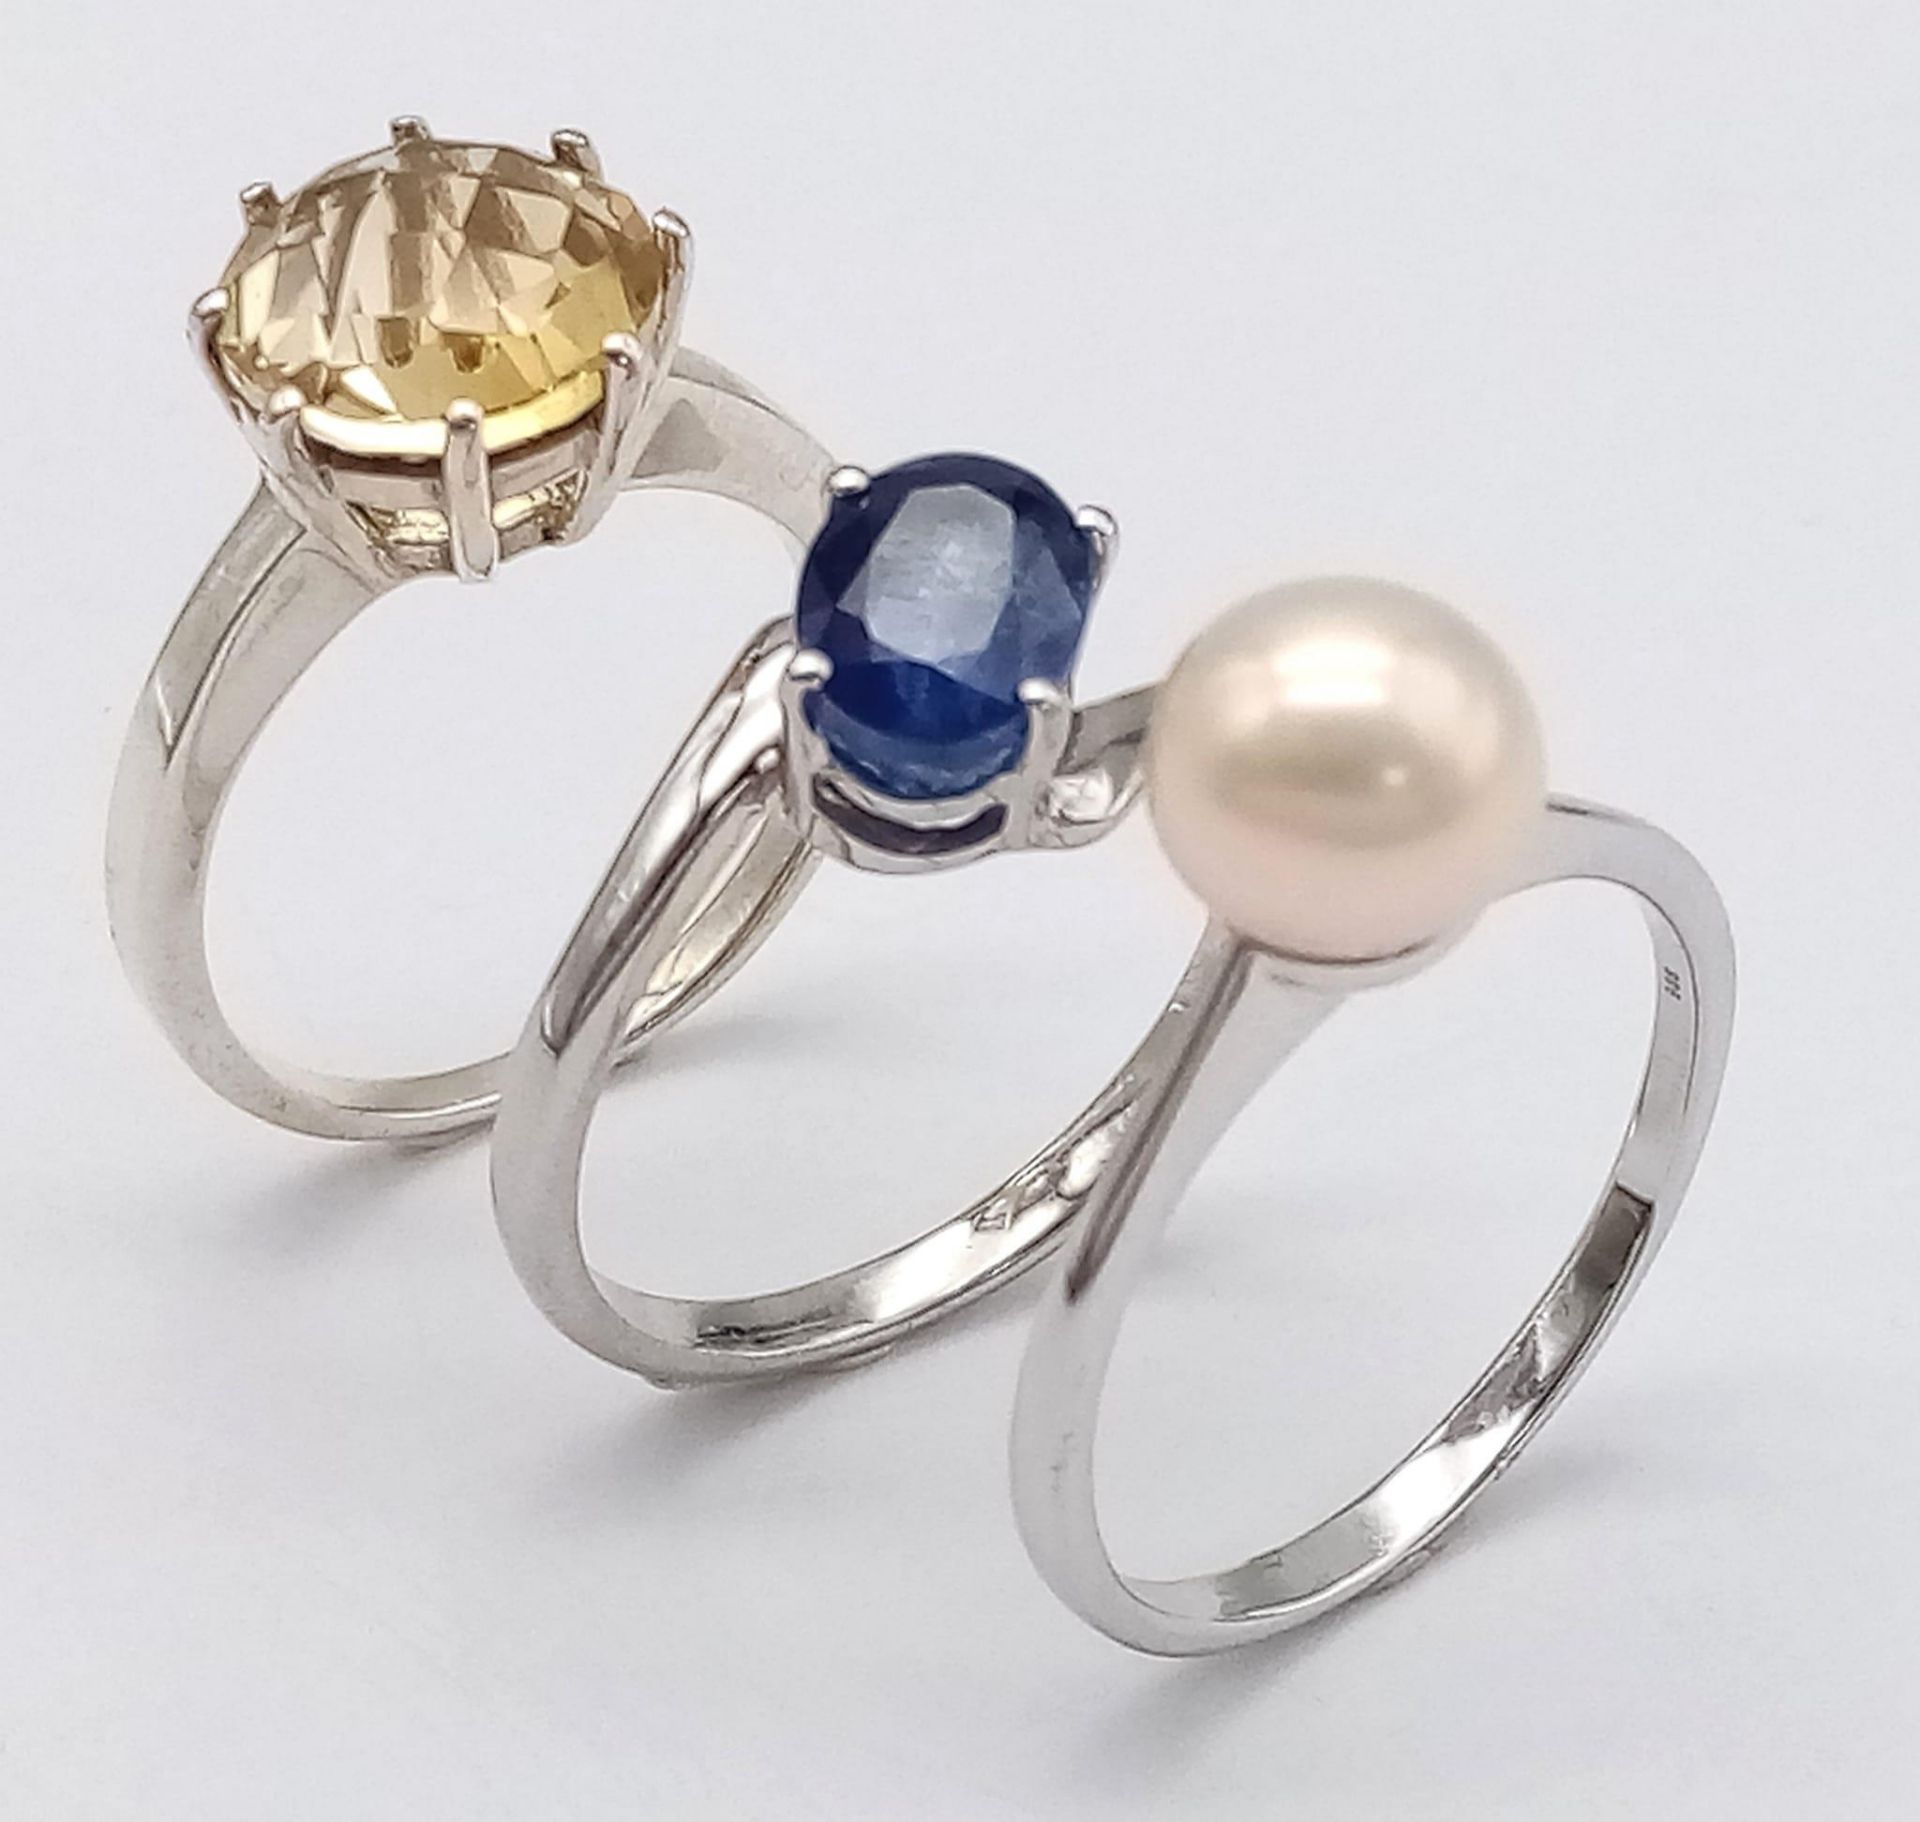 Three 925 Sterling Silver Gemstone Rings: Citrine- Size O, Sapphire - Size P and Cultured Pearl -